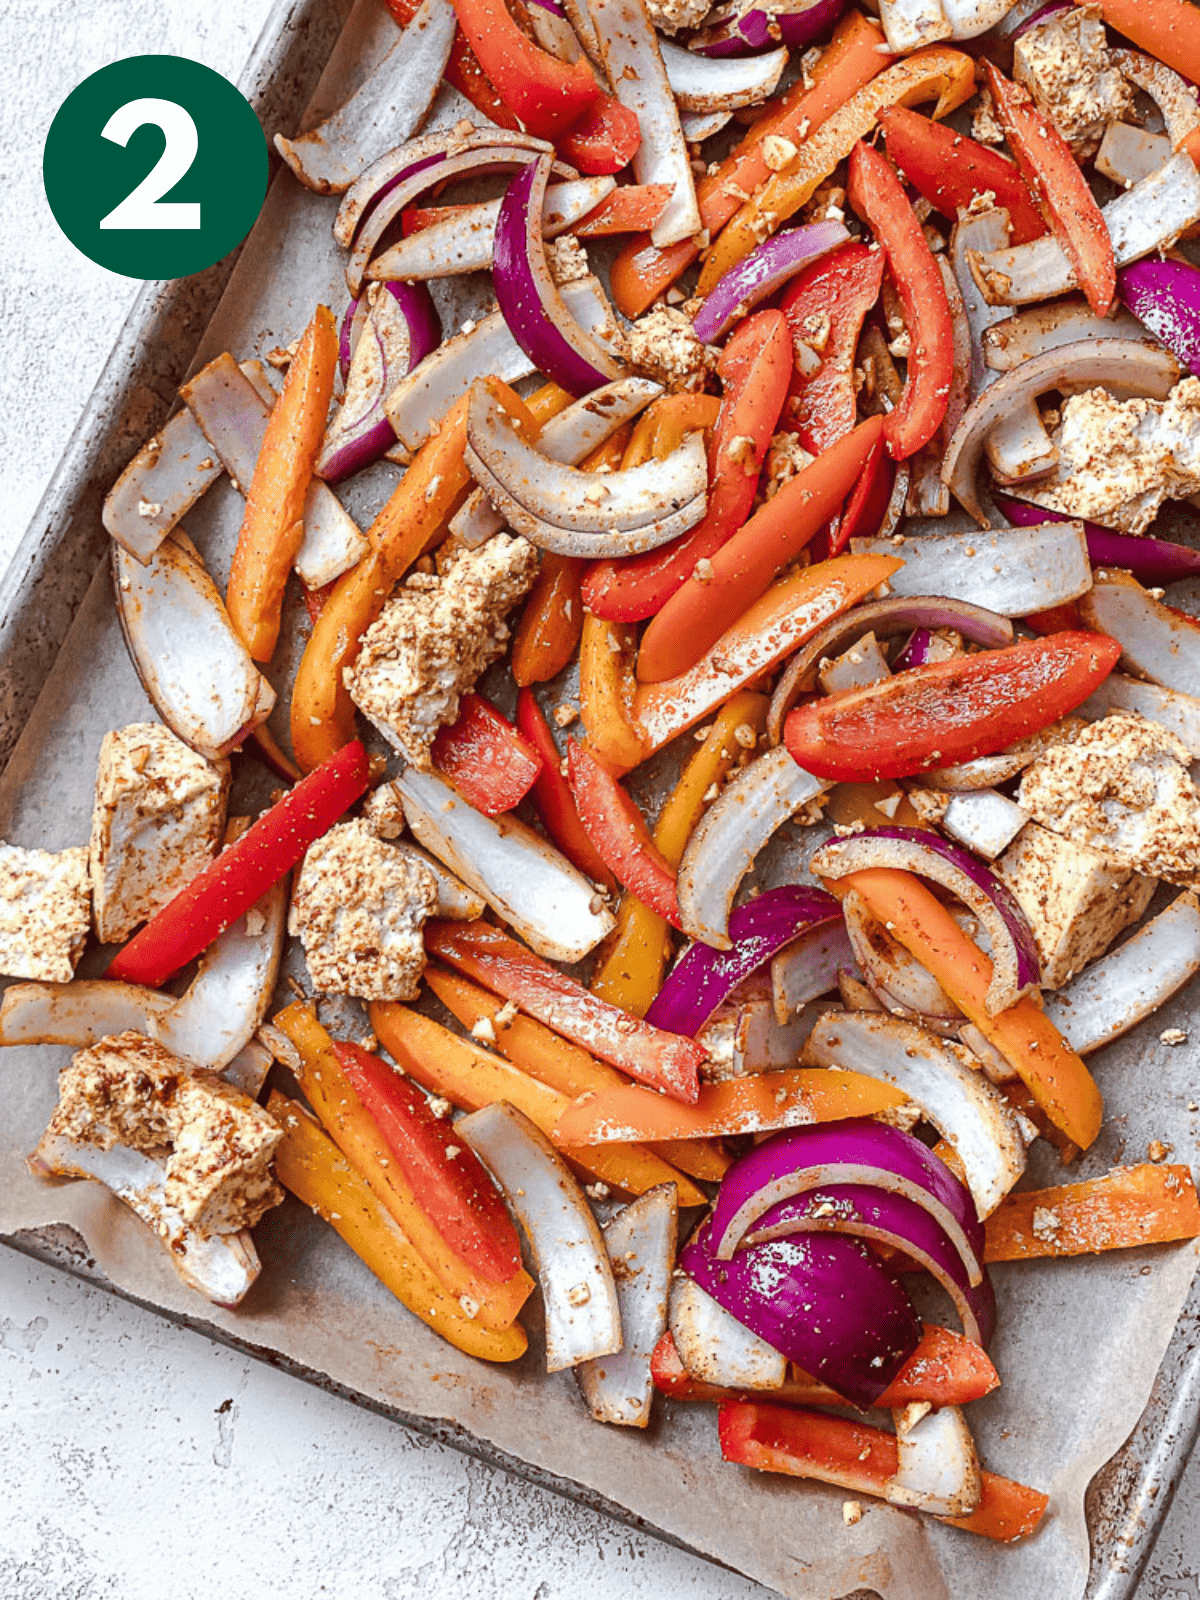 seasoned onions, bell peppers, and tofu c،ks on a parchment-lined baking sheet.